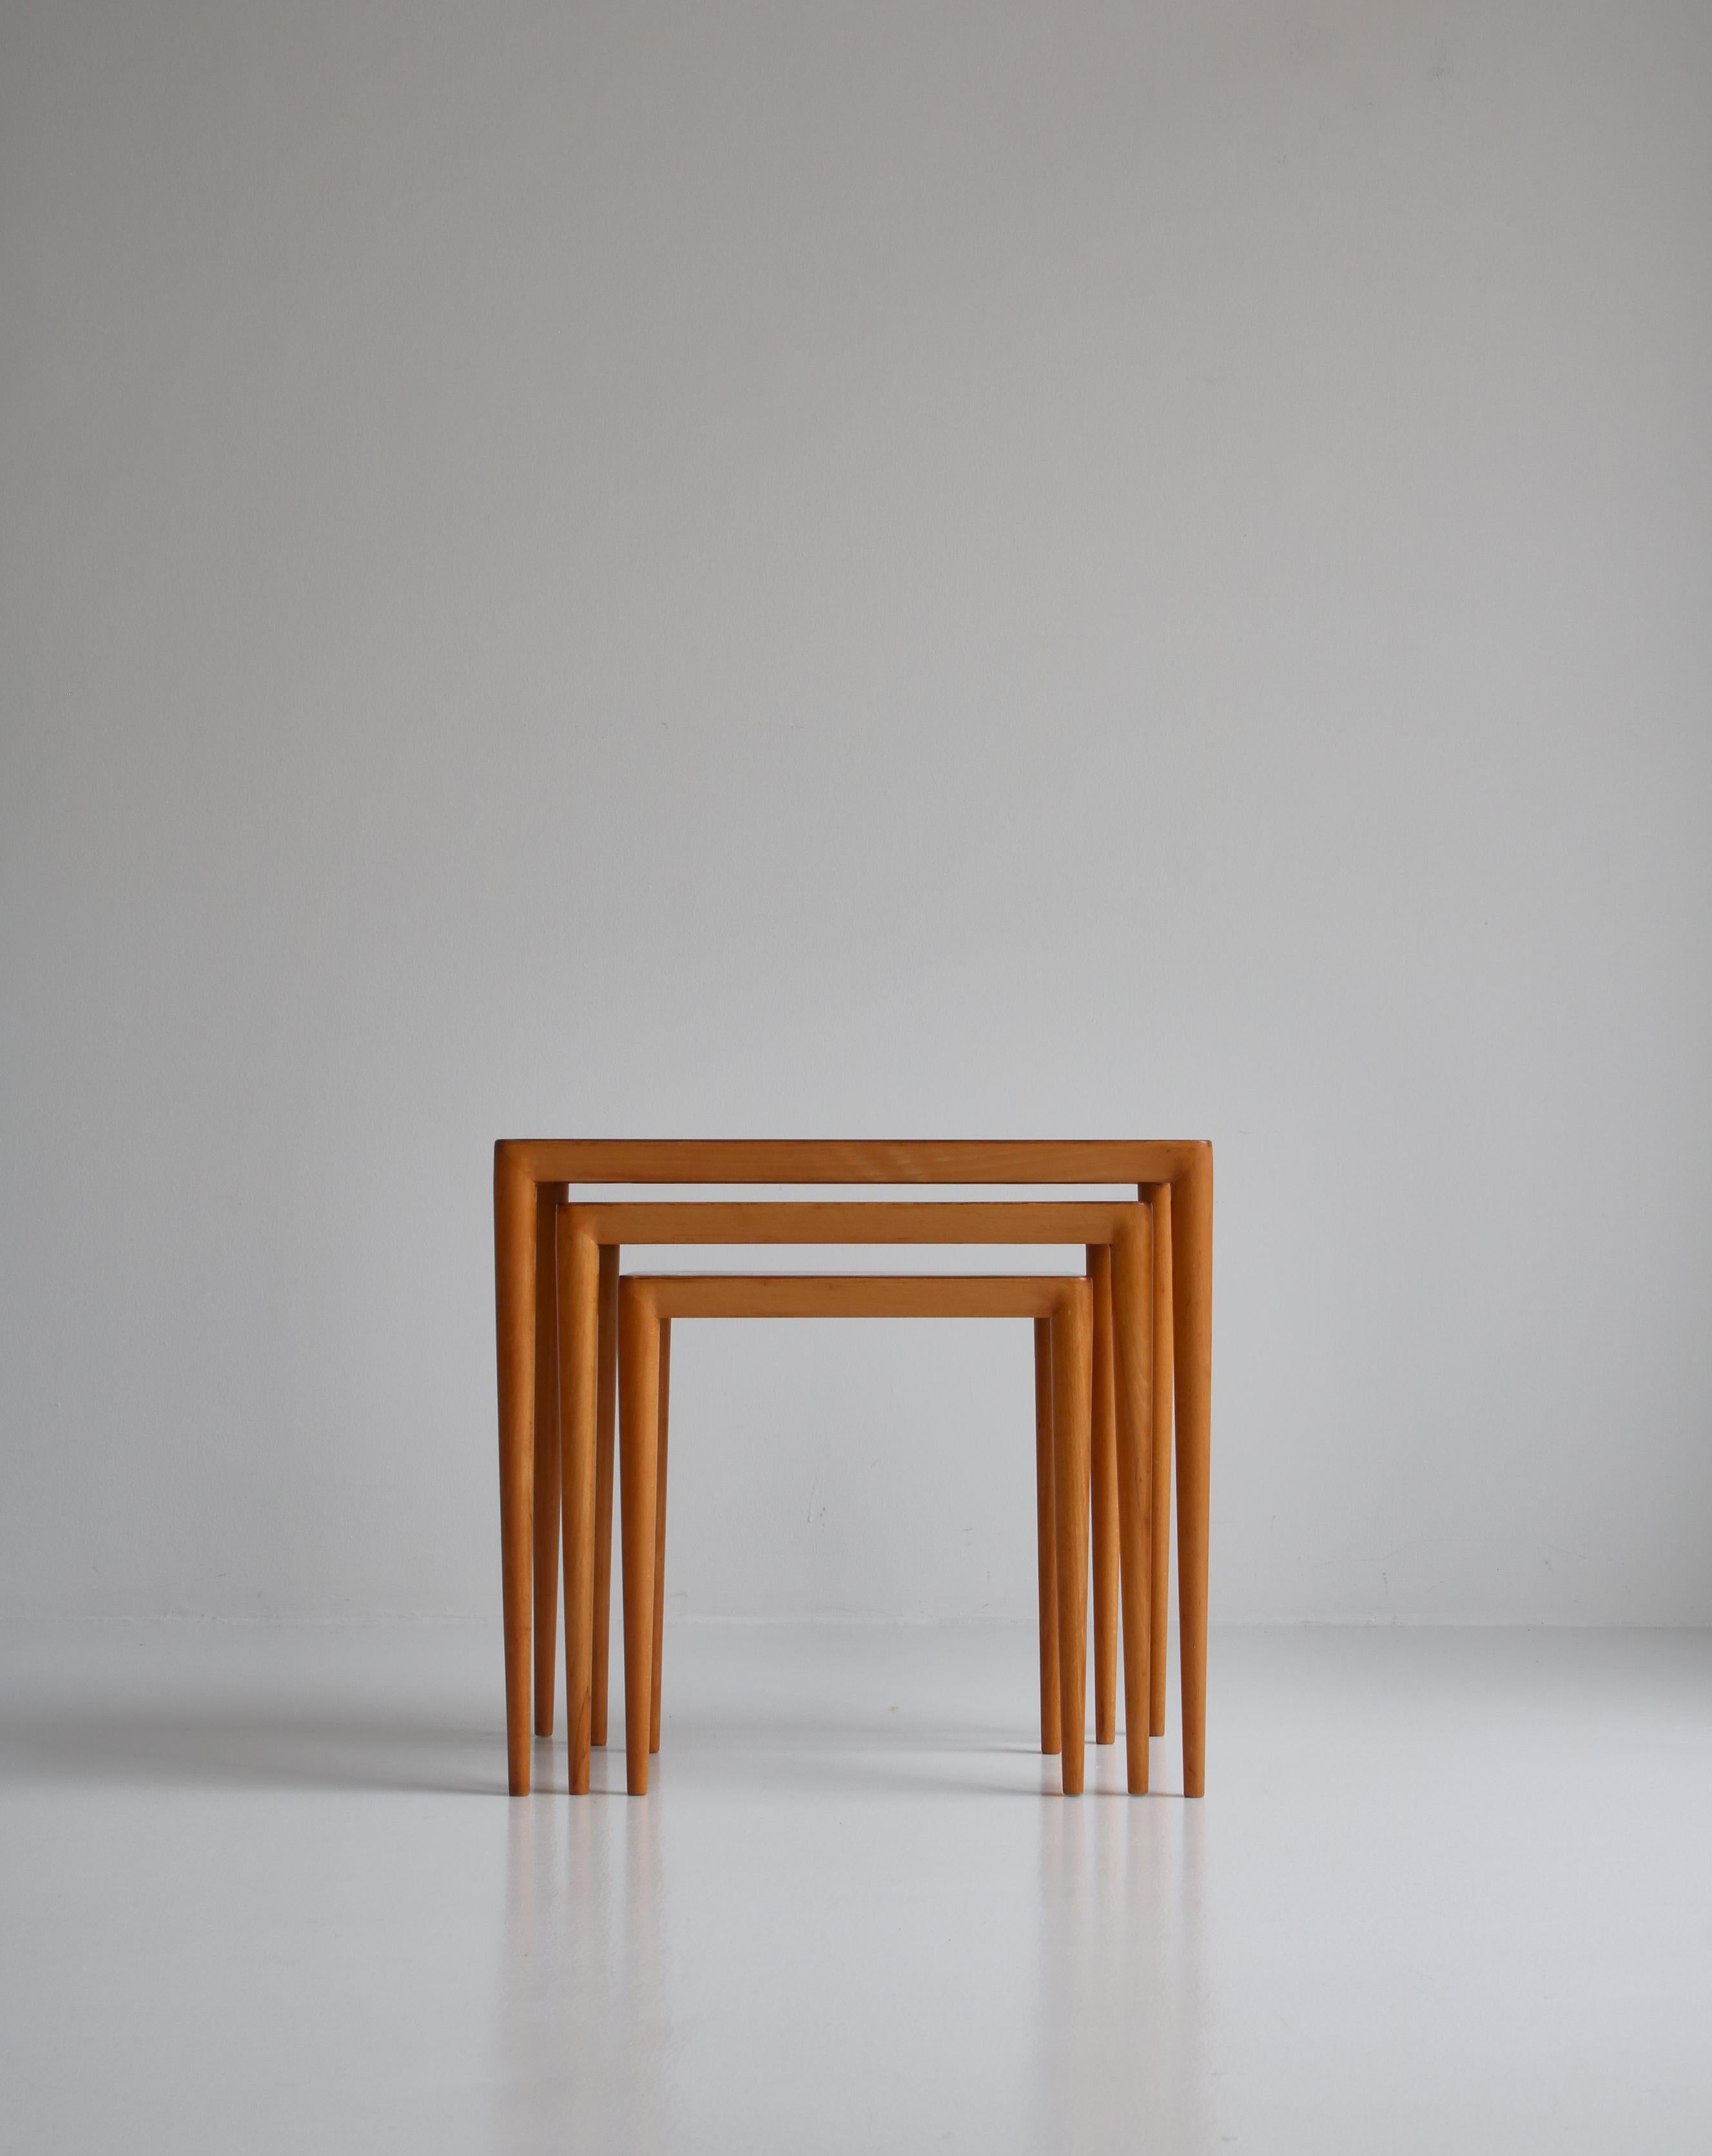 Rare set of vintage Scandinavian Modern nesting tables in birchwood and beech by Erik Severin Risager-Hansen. The skillfully crafted tables features subtle details such as the soft rounded edges and the wonderful warm grain of the birch veneer. The